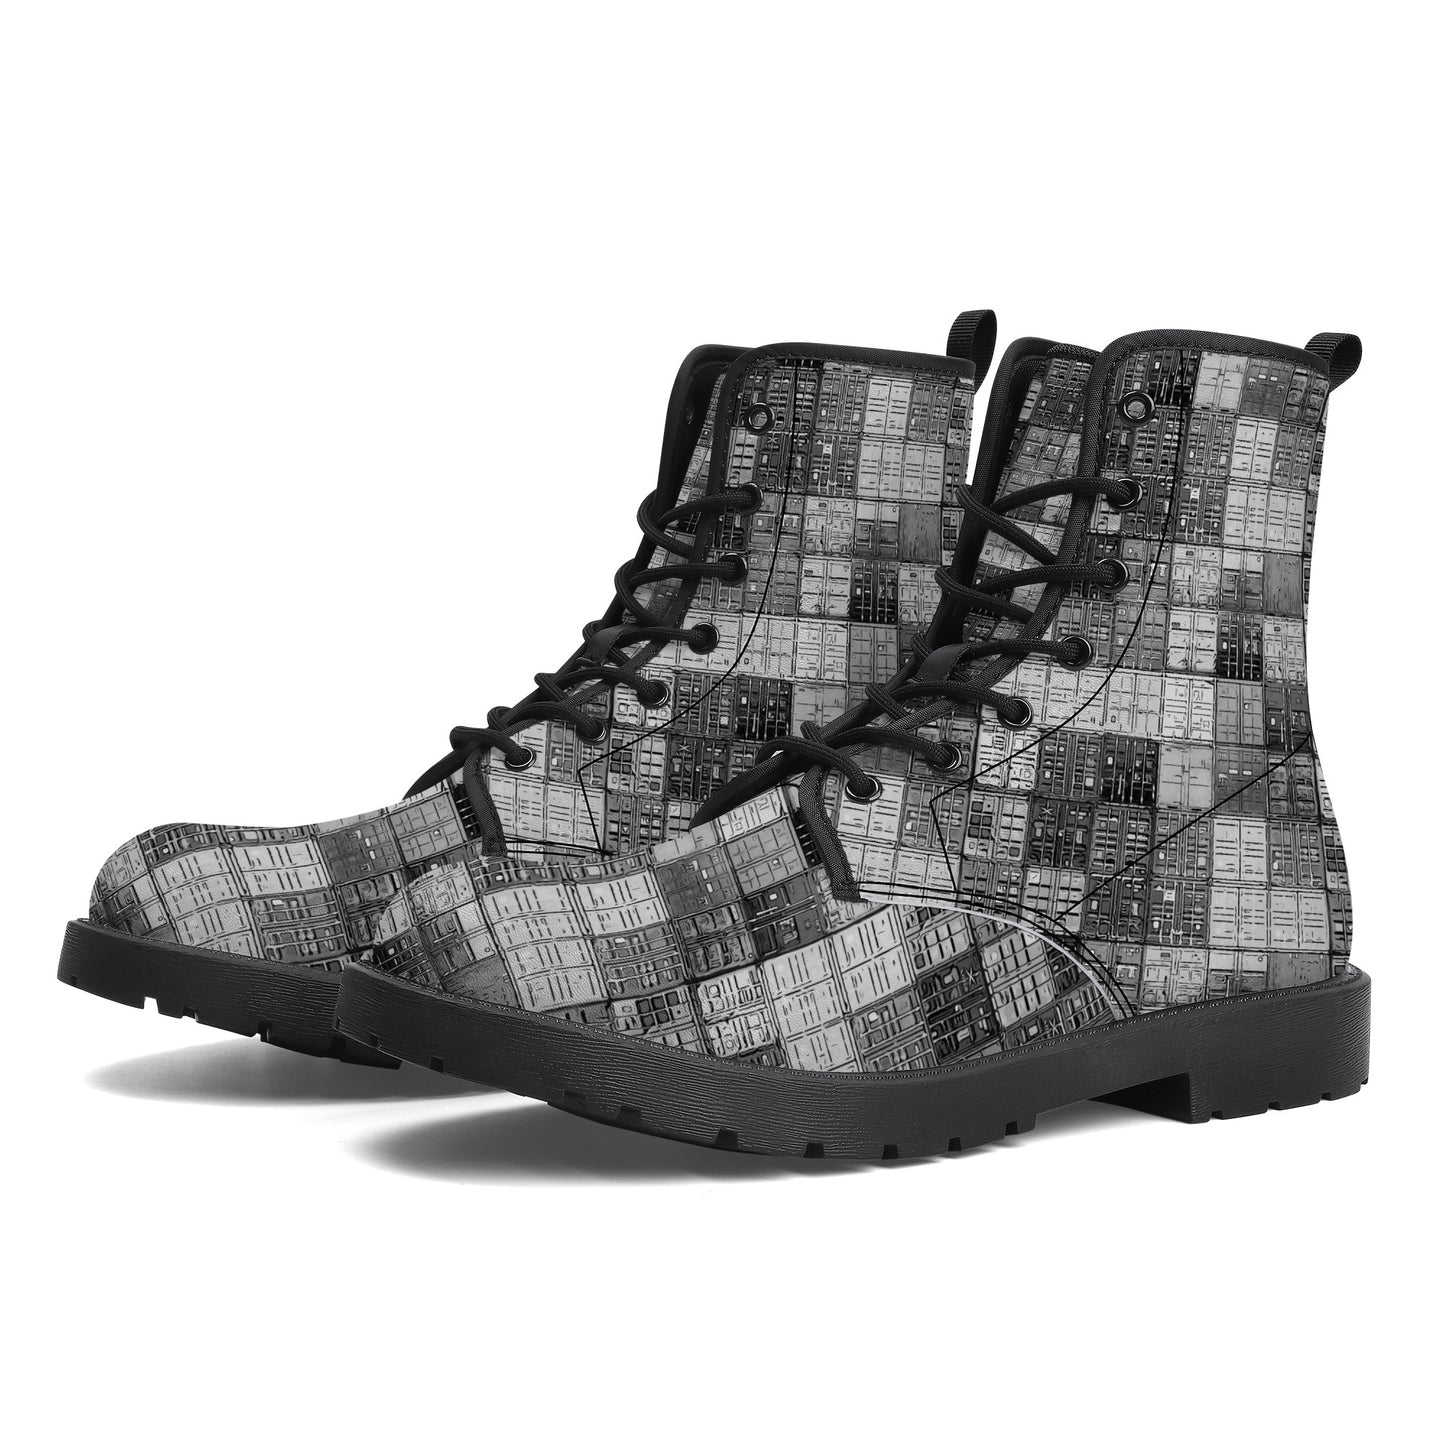 "Mono Shipping Containers" Eco-friendly Boots